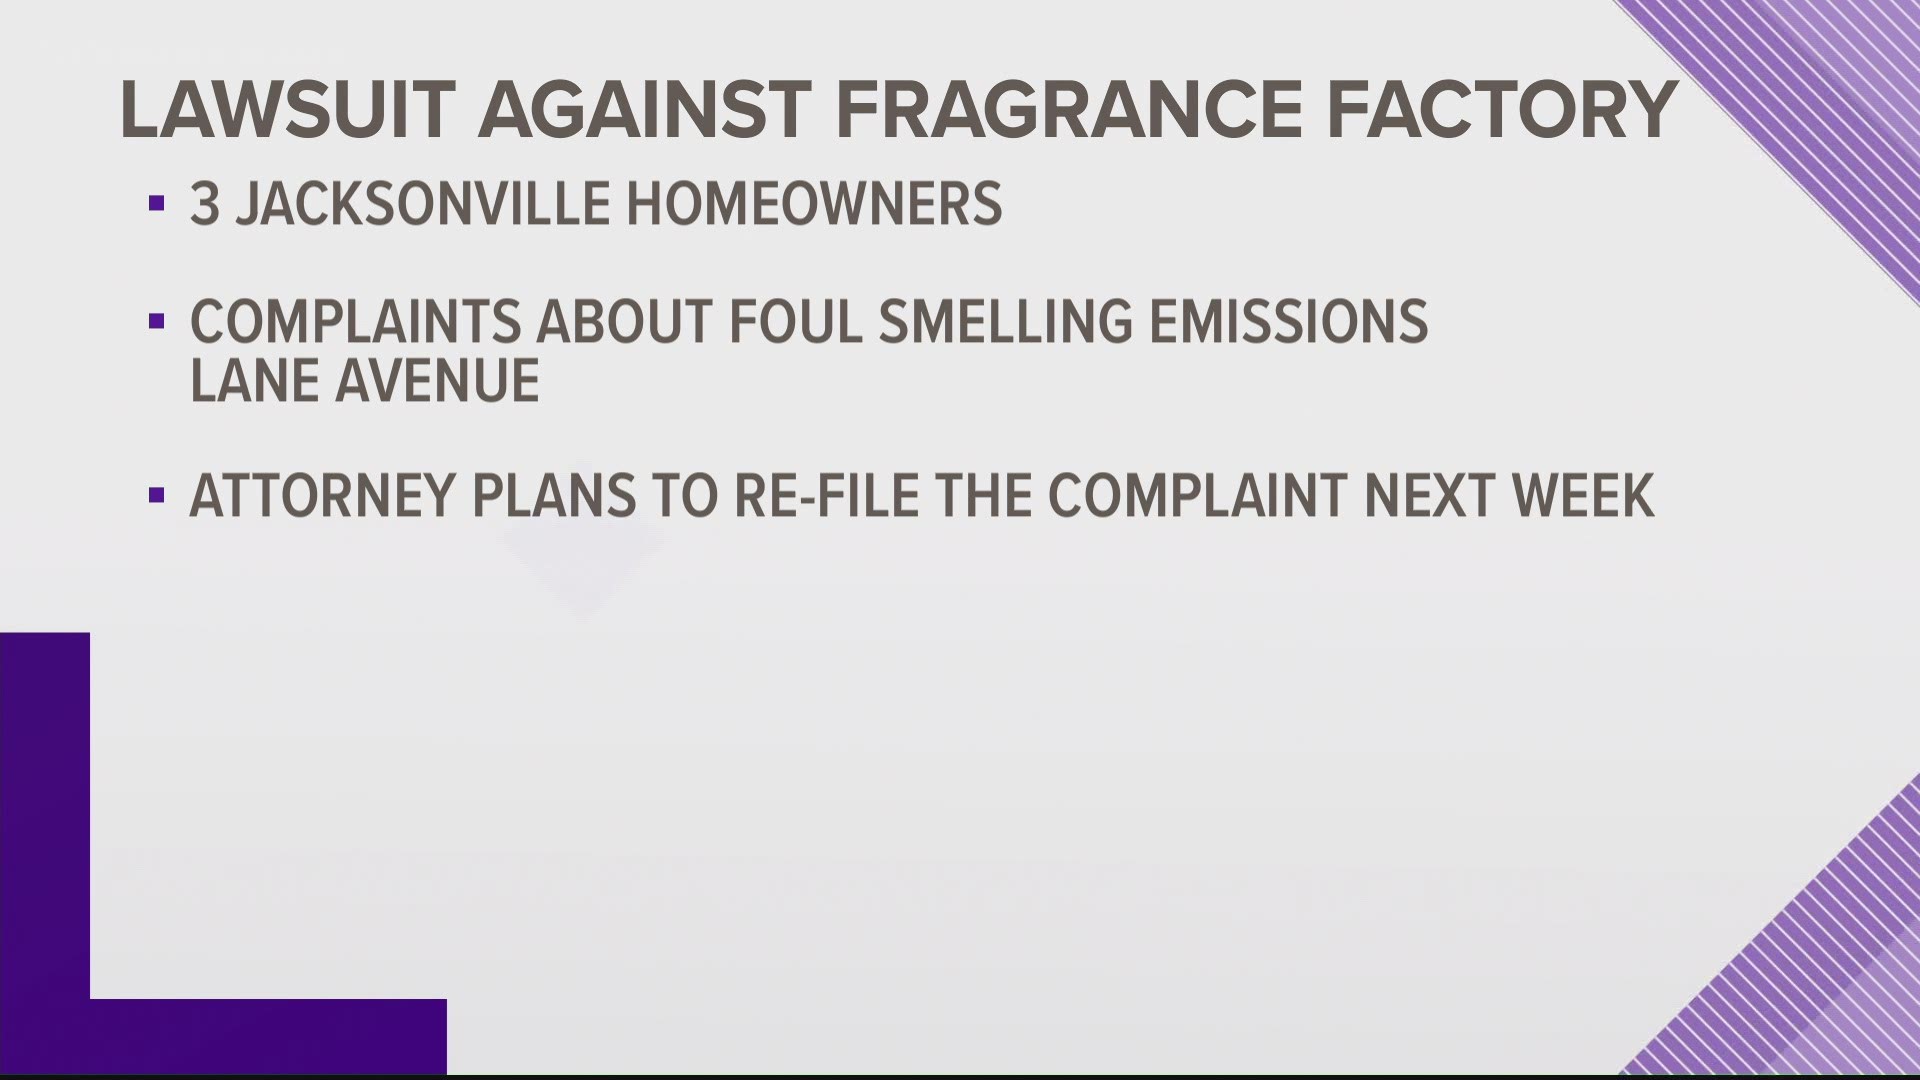 The federal complaint comes after months of complaints about foul smelling emissions from the International Flavors & Fragrances factory on Lane Avenue.